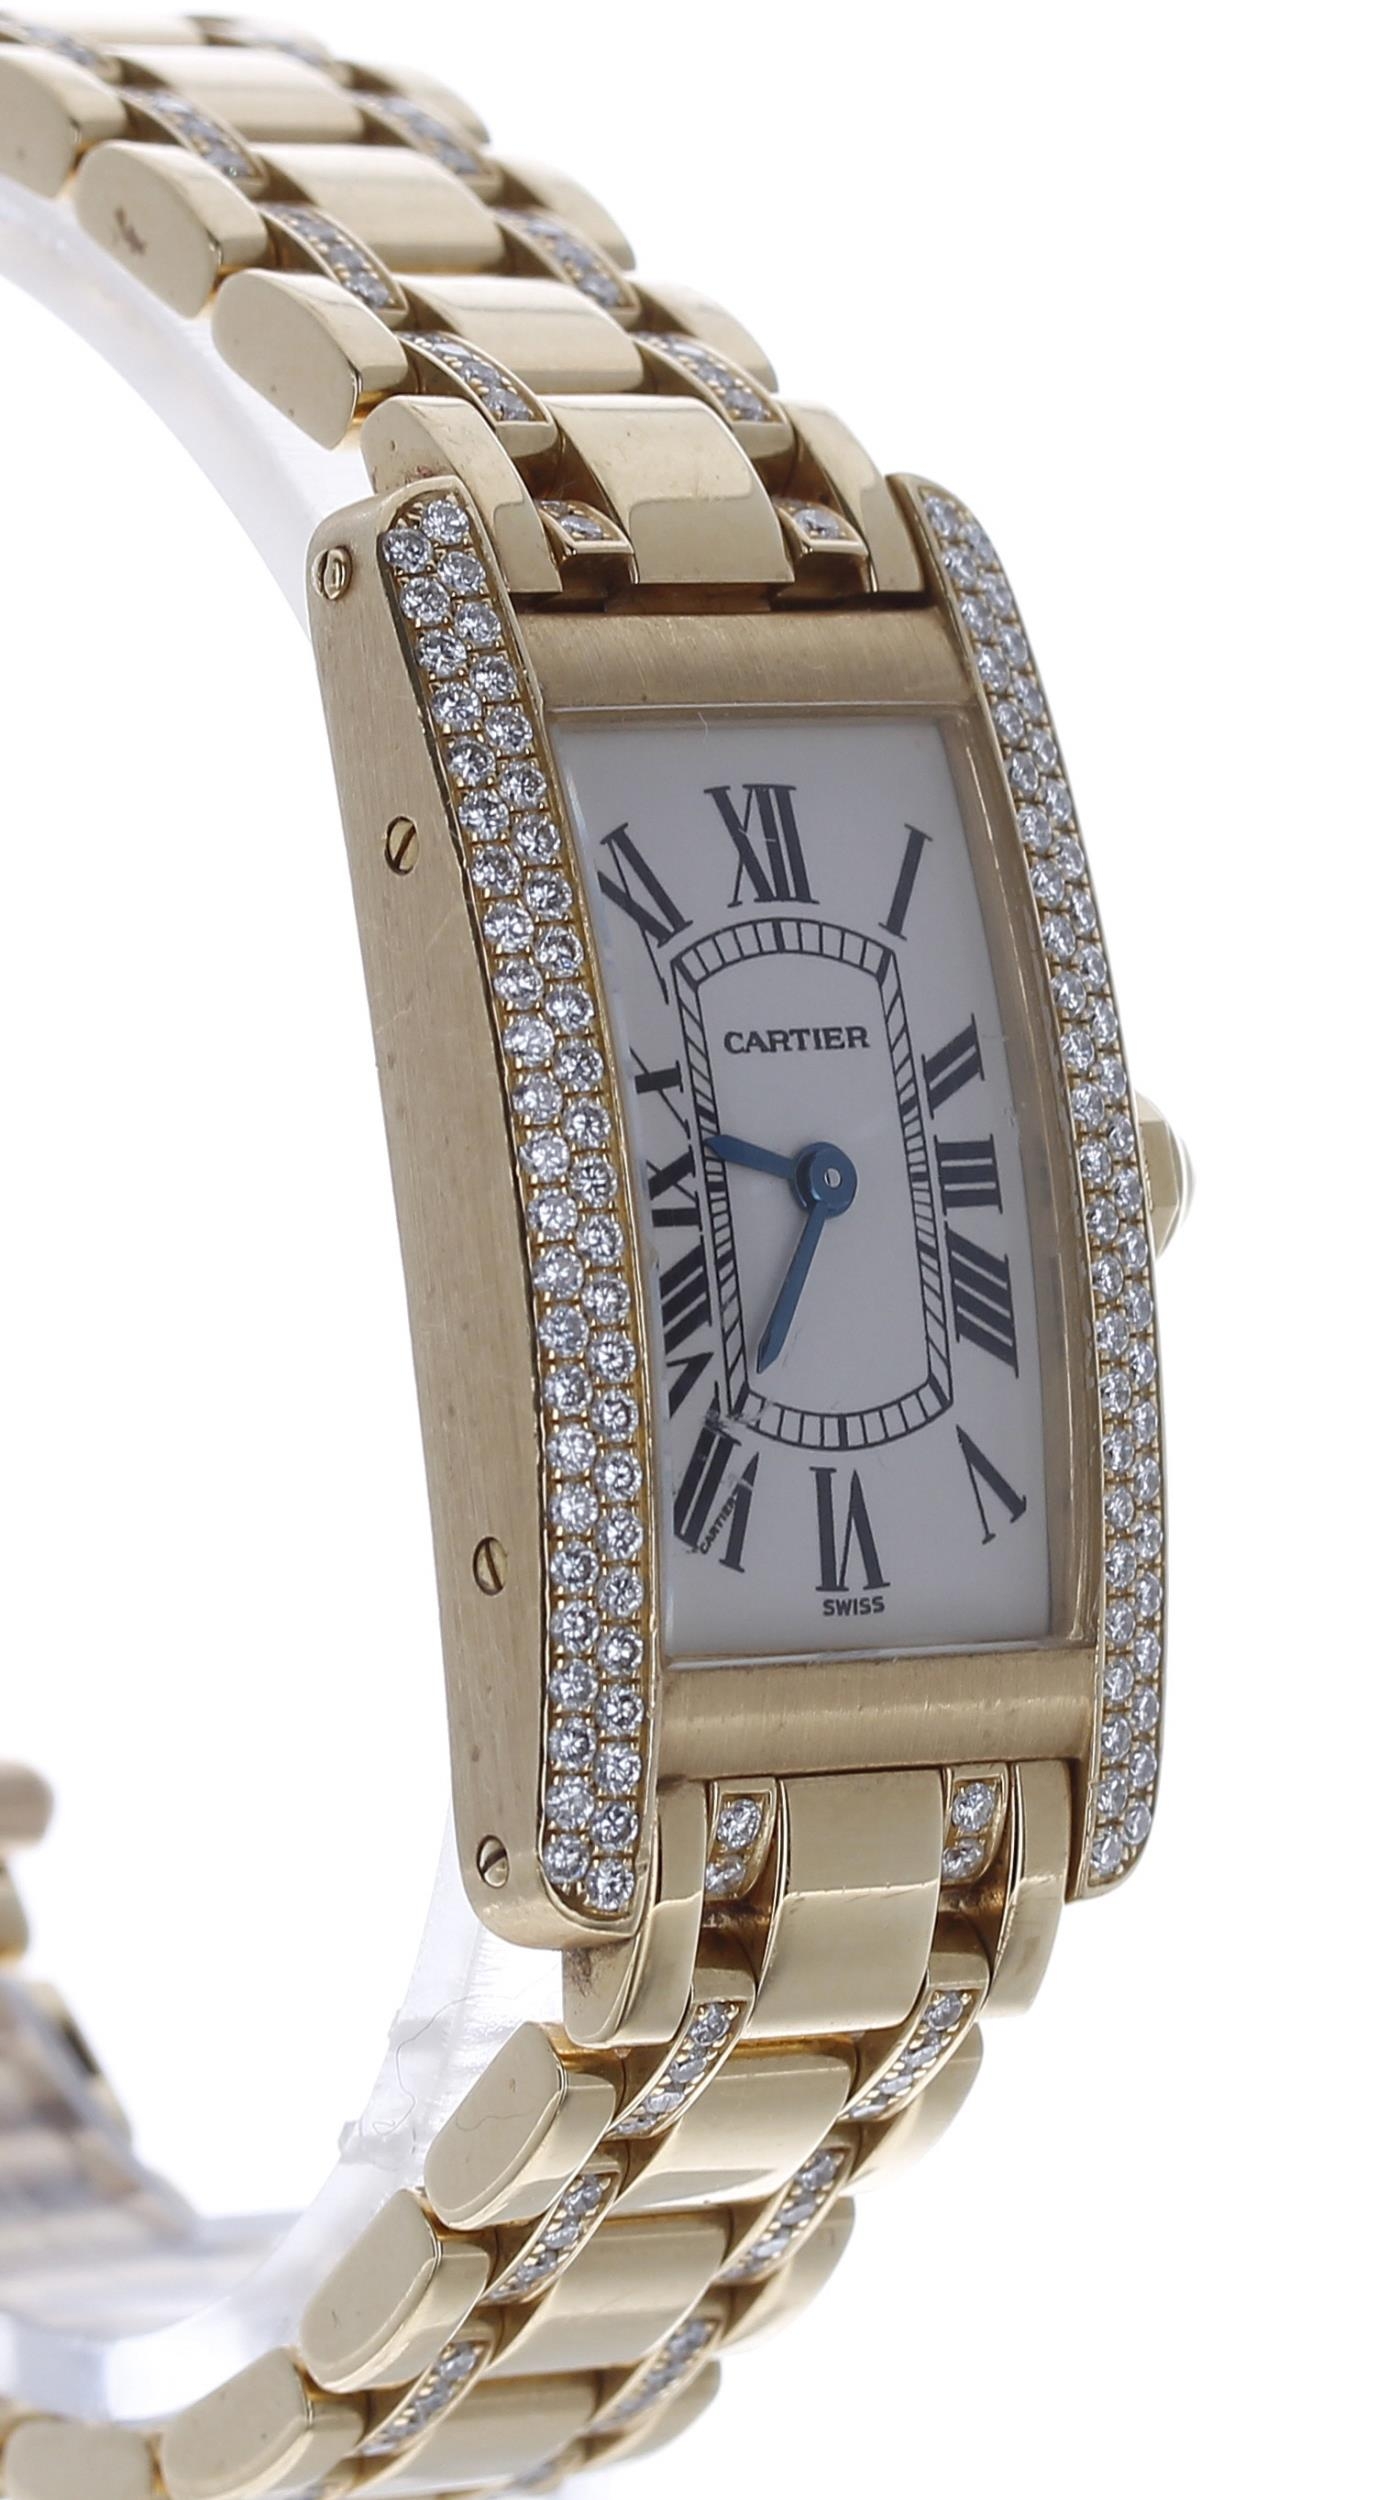 Cartier Tank Americaine 18ct and diamond lady's wristwatch, reference no.1710, serial no. - Image 3 of 5